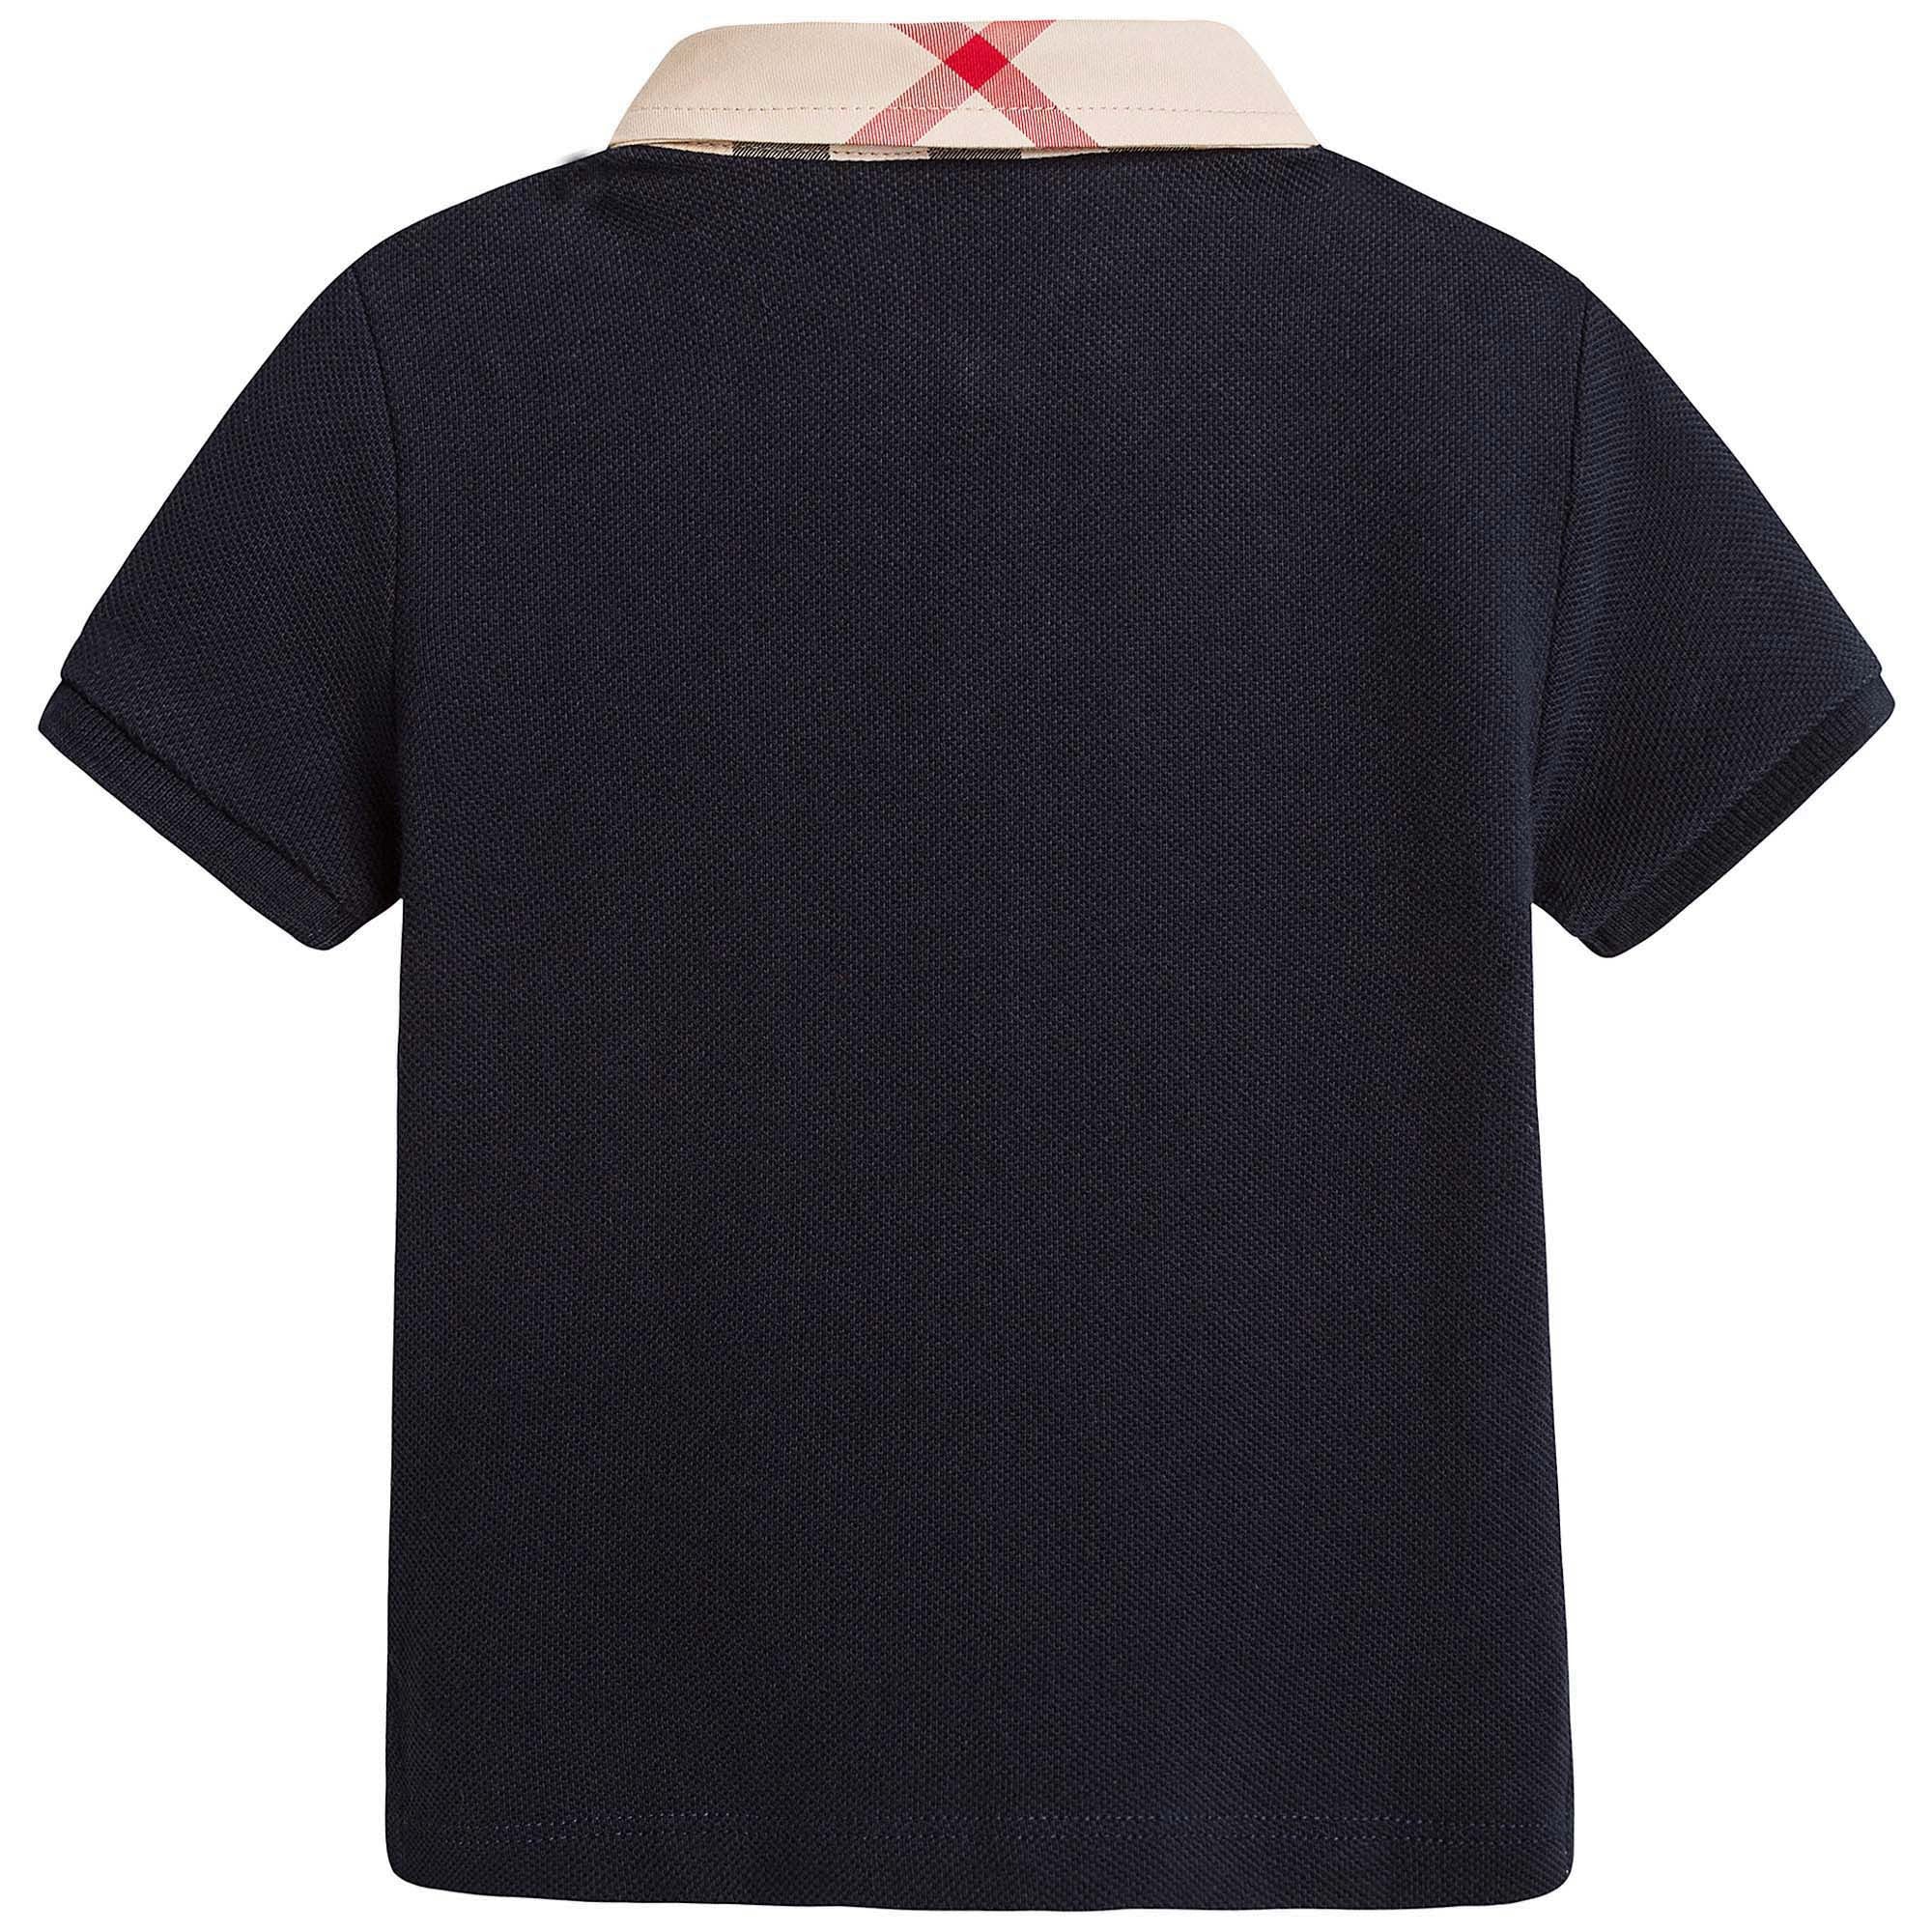 Baby Boys Navy Blue Polo Shirt With Check Collar - CÉMAROSE | Children's Fashion Store - 2